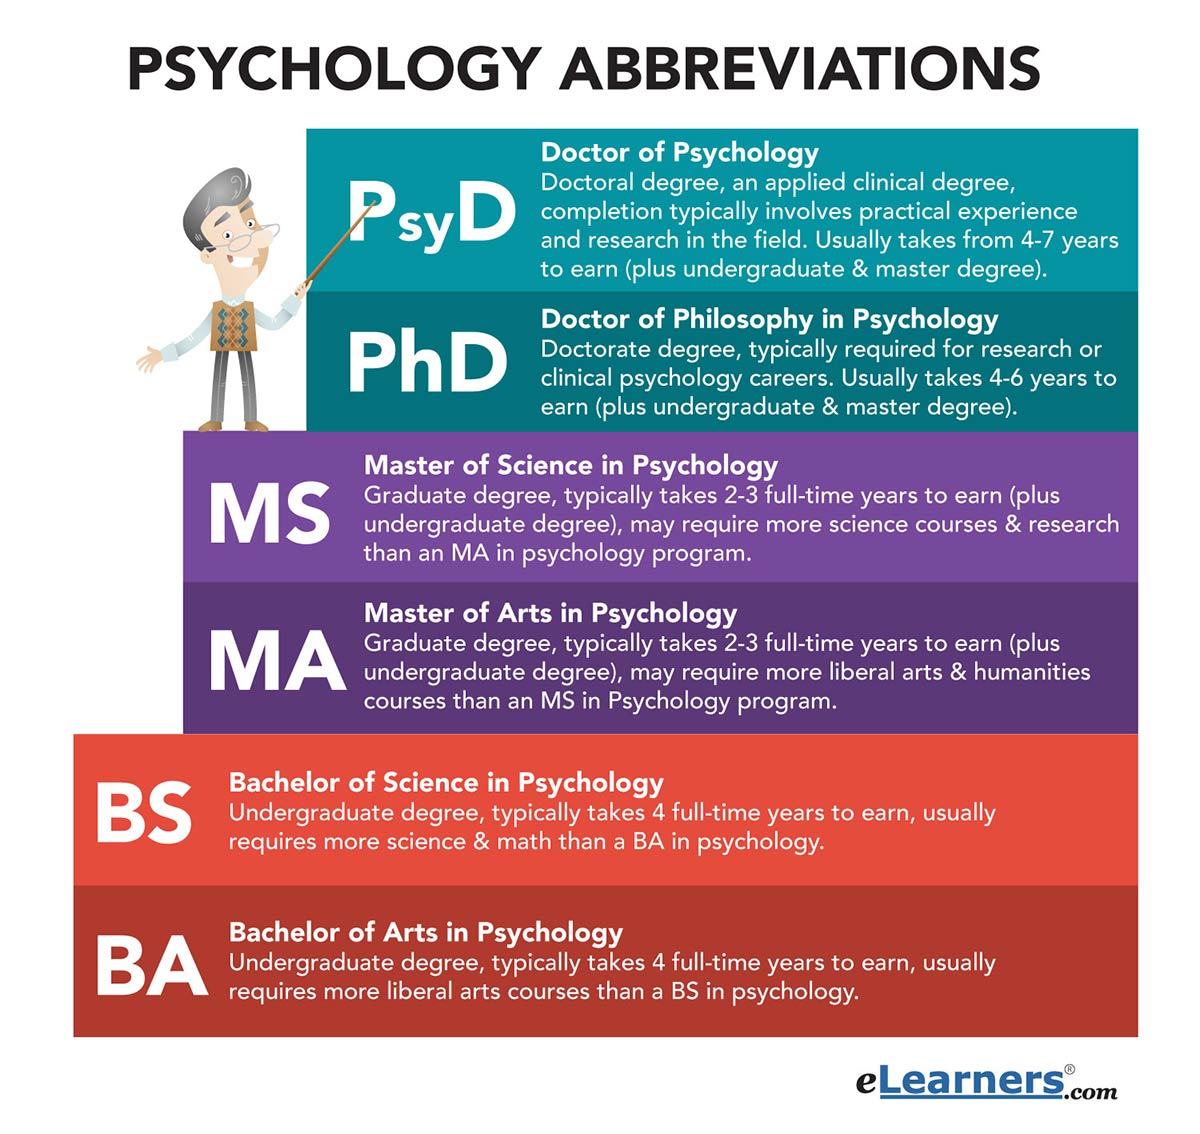 Read all the psychology abbreviations